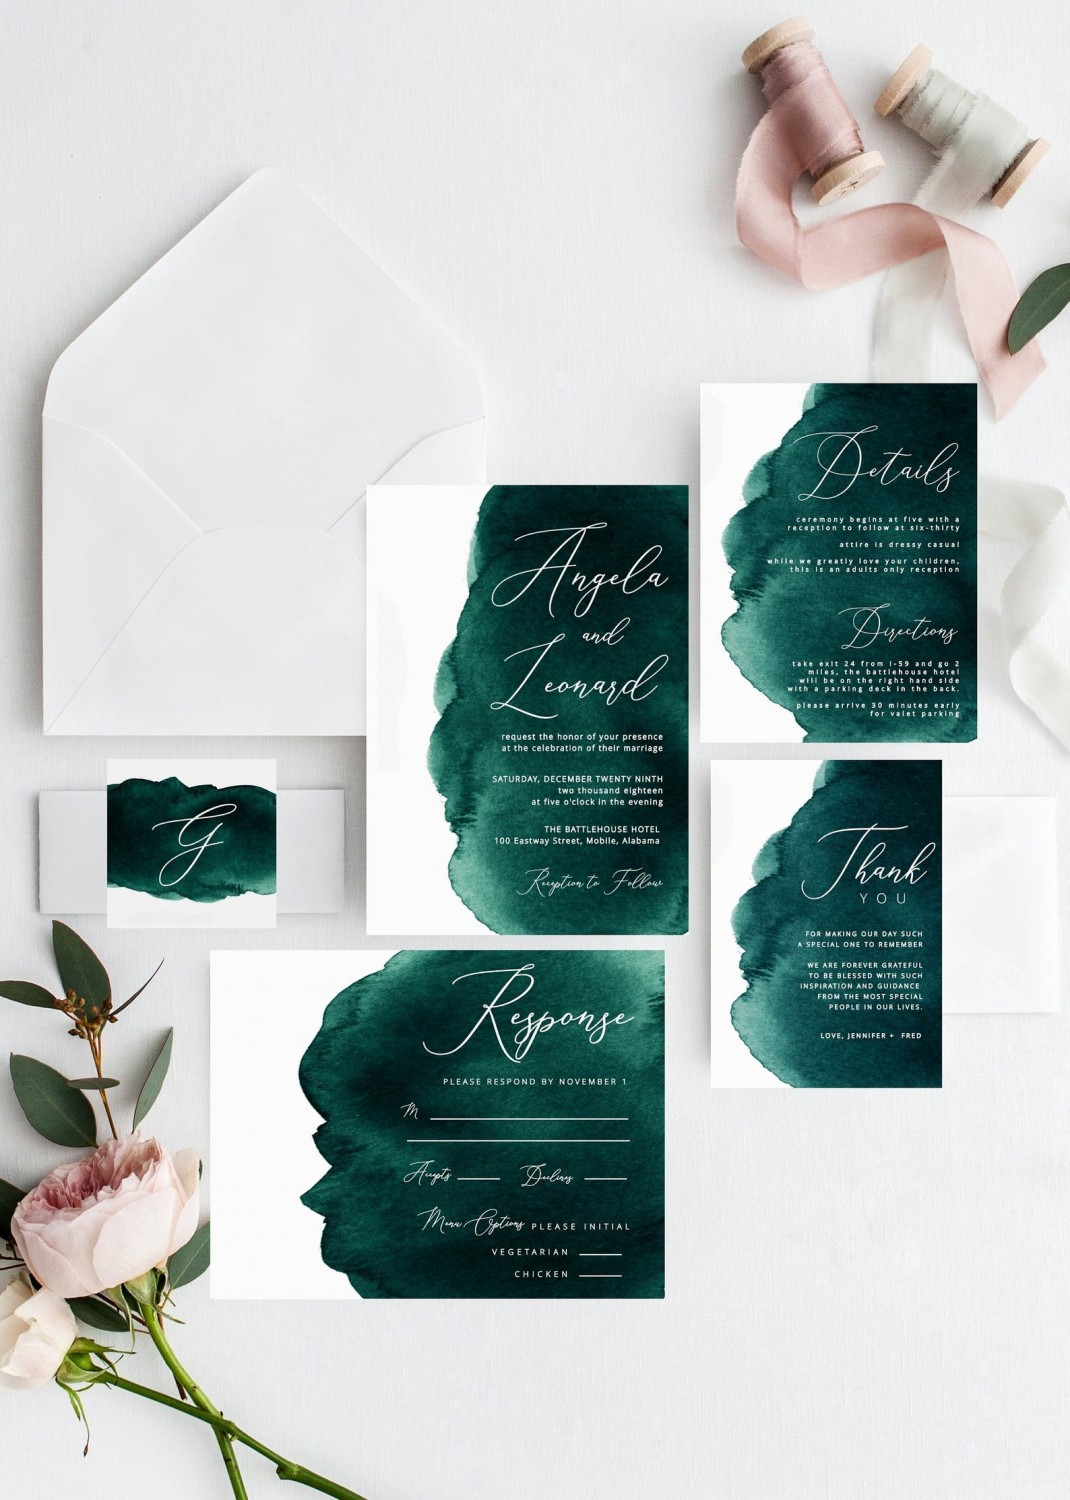 Inexpensive Wedding Invitations That Look Anything But